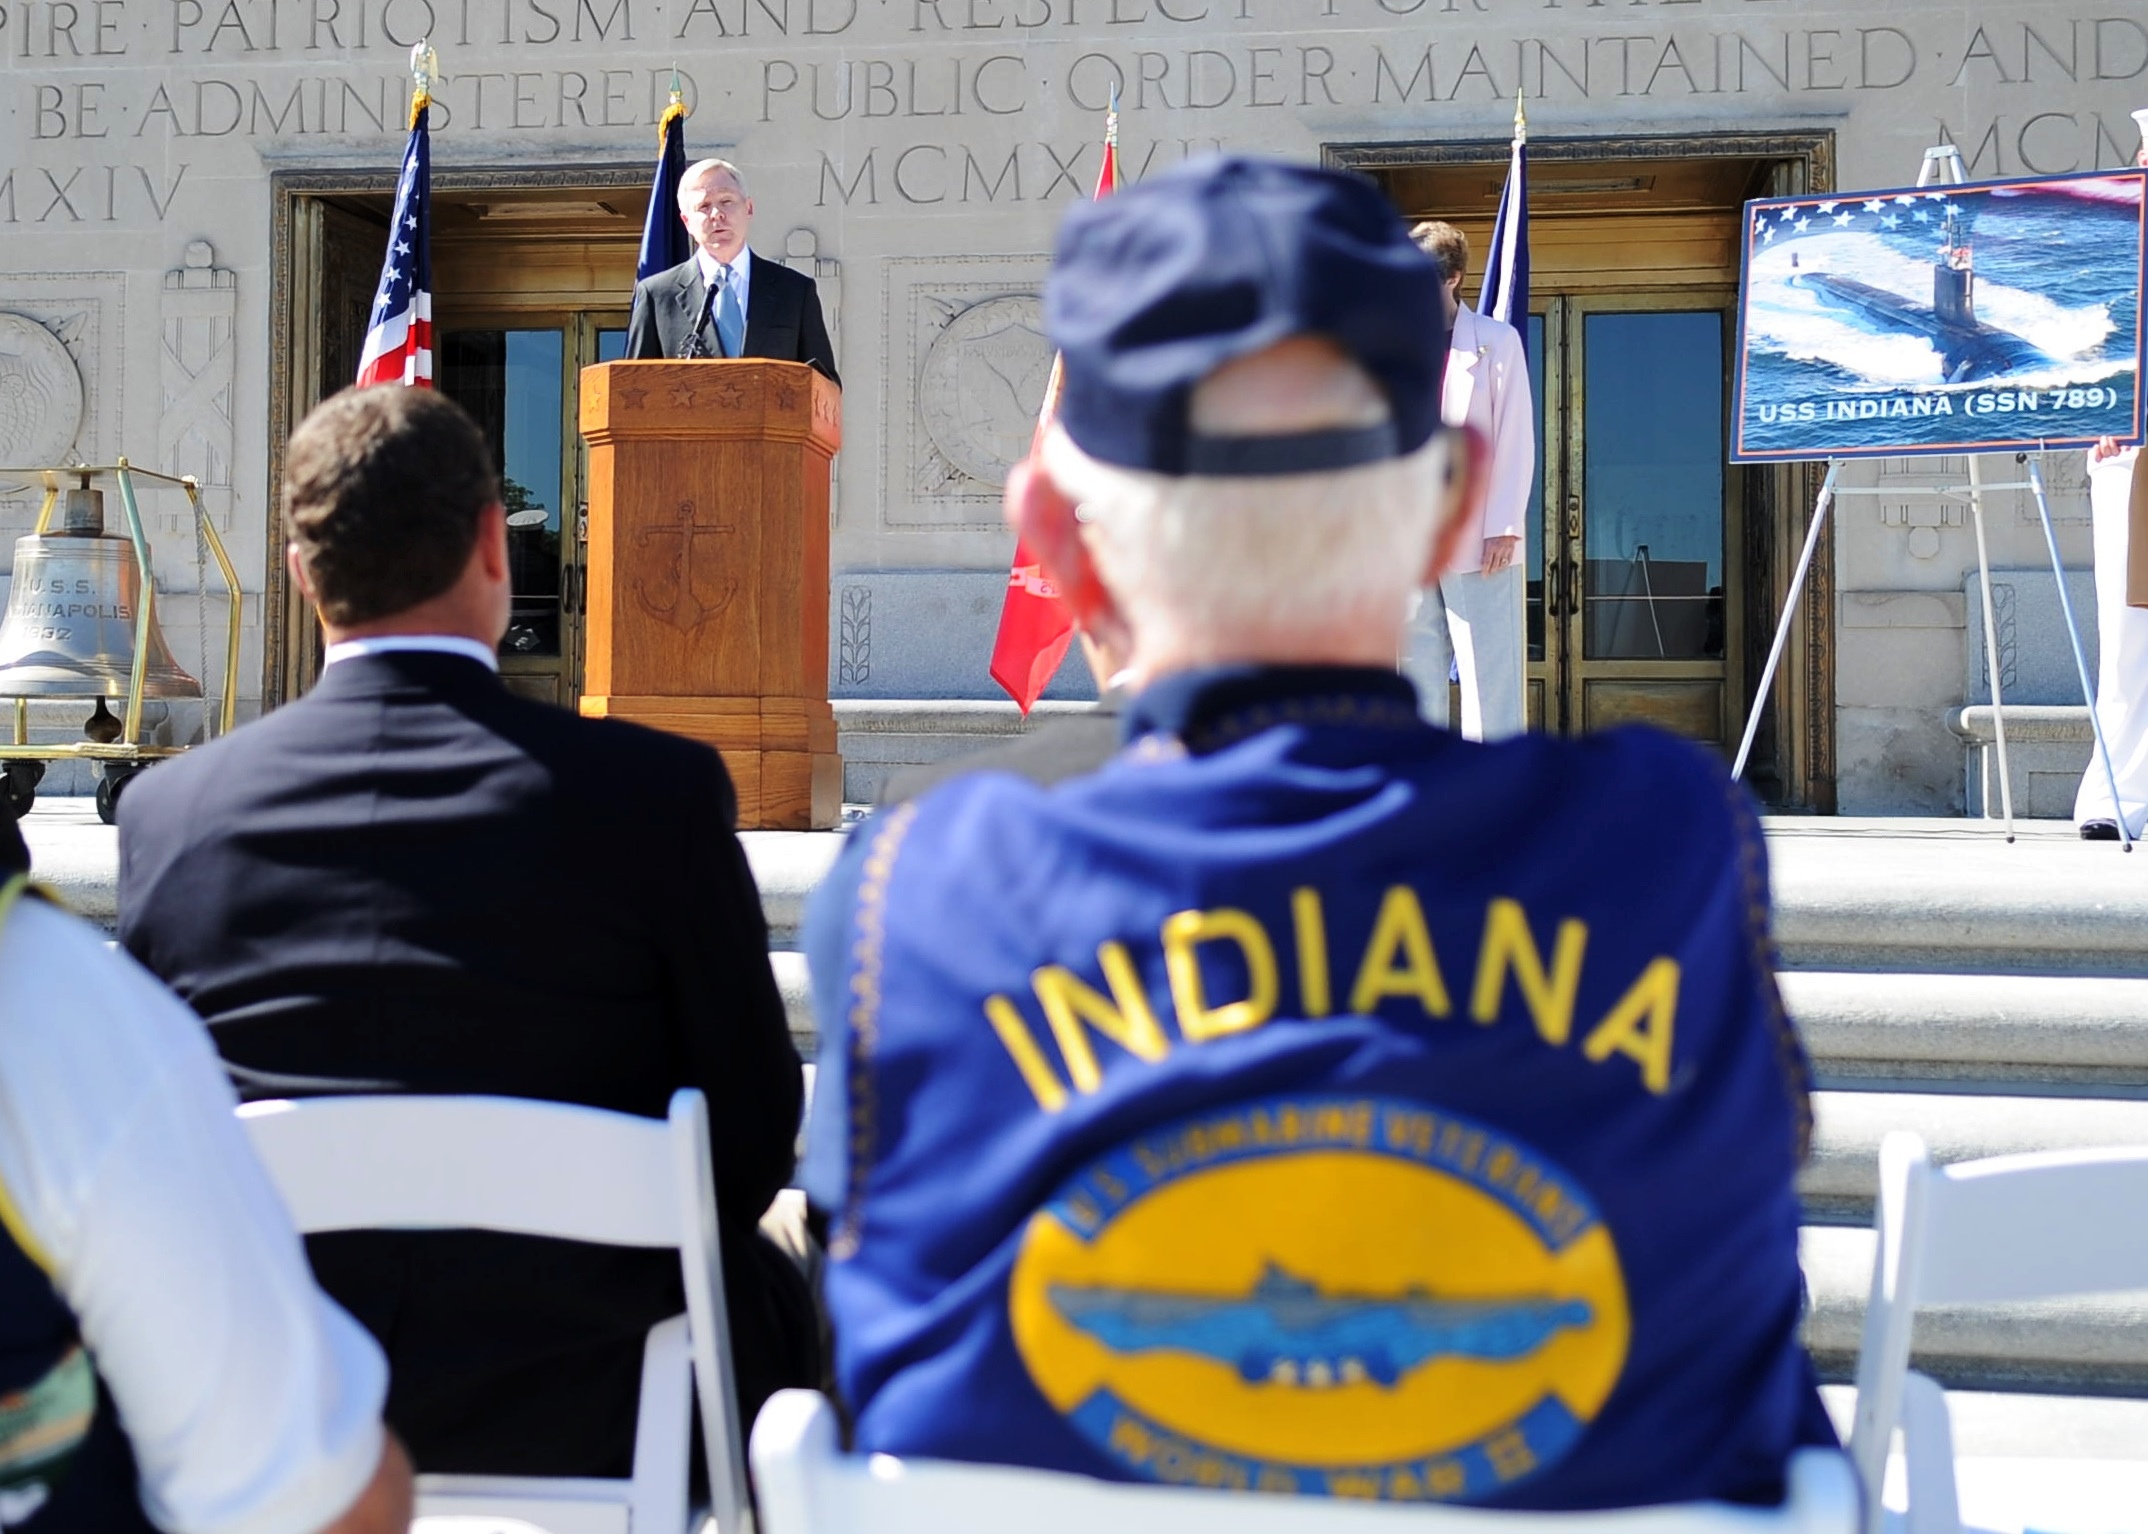 Secretary of the Navy (SECNAV) the Honorable Ray Mabus provides remarks during the ceremony celebrating the naming of the Virginia-class submarine USS Indiana (SSN 789), at the Indianapolis War Memorial.